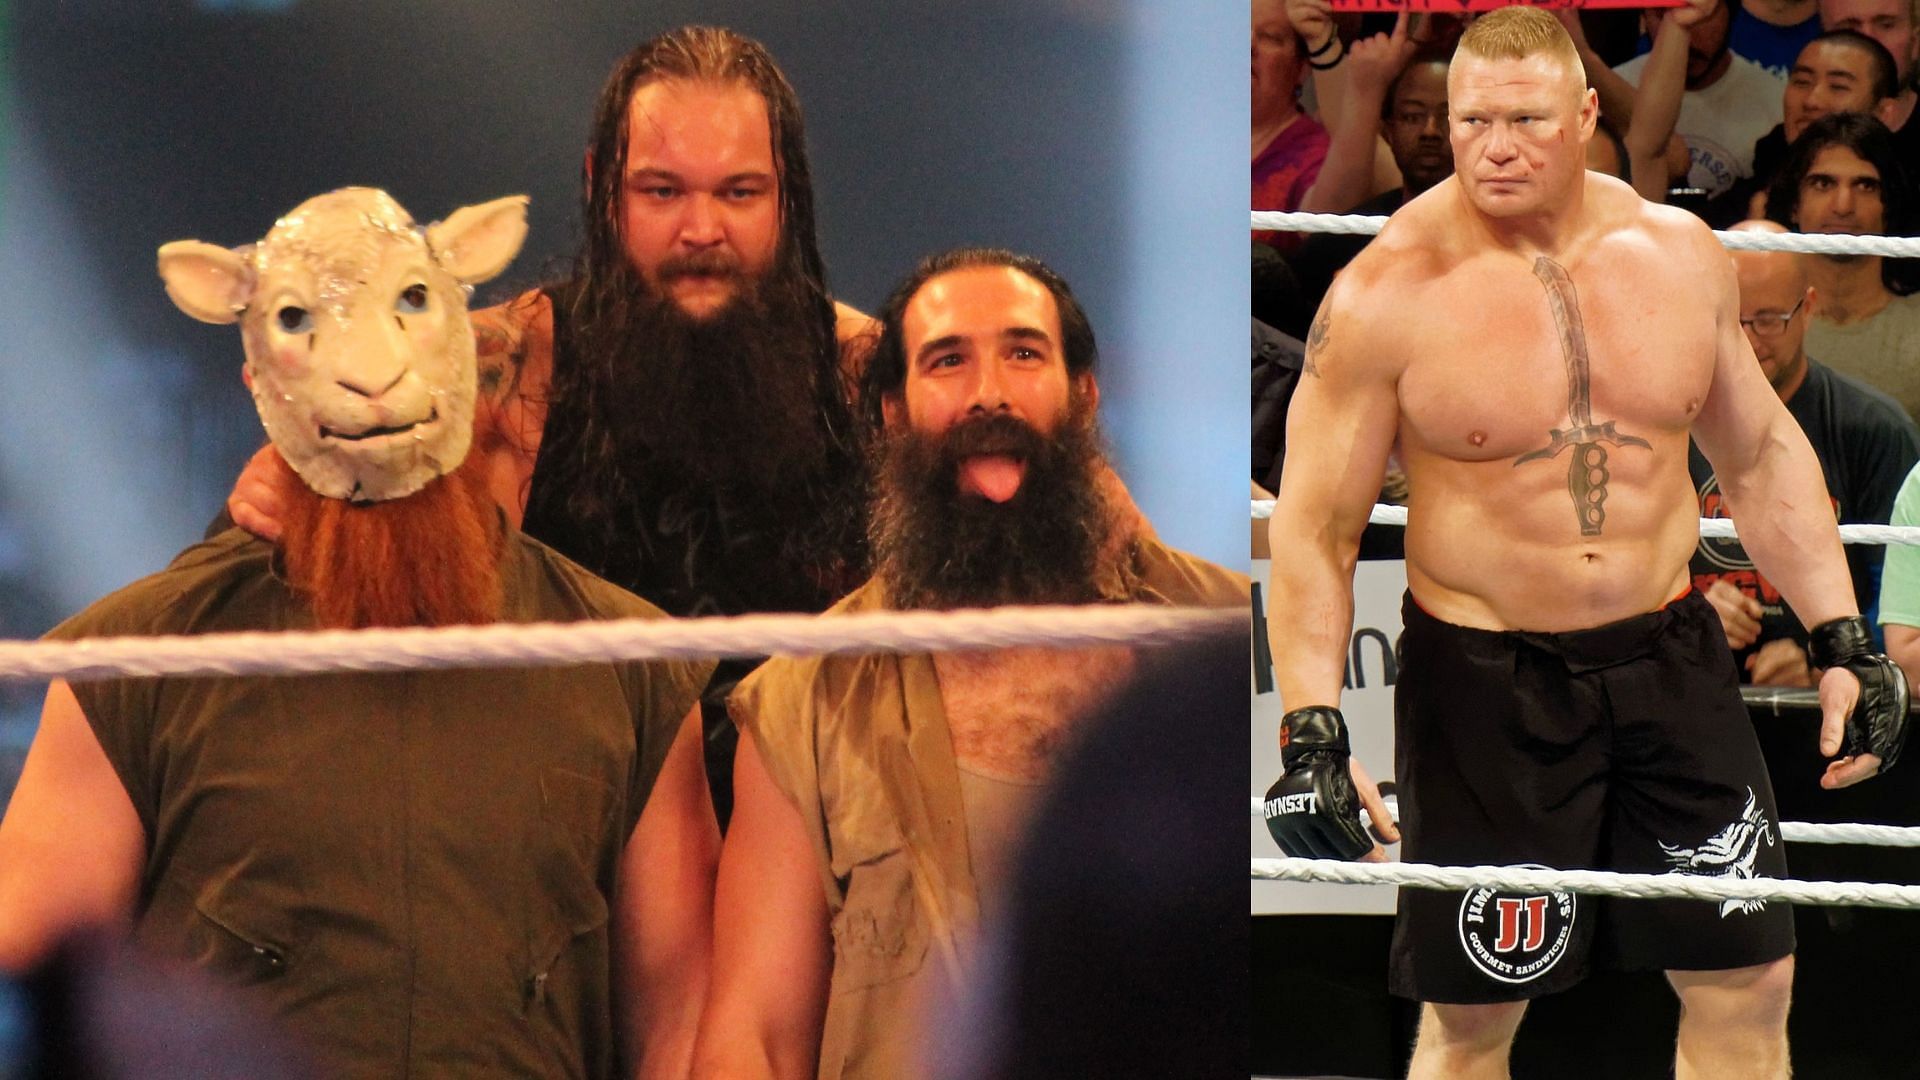 wwe superstars invaded royal rumble match